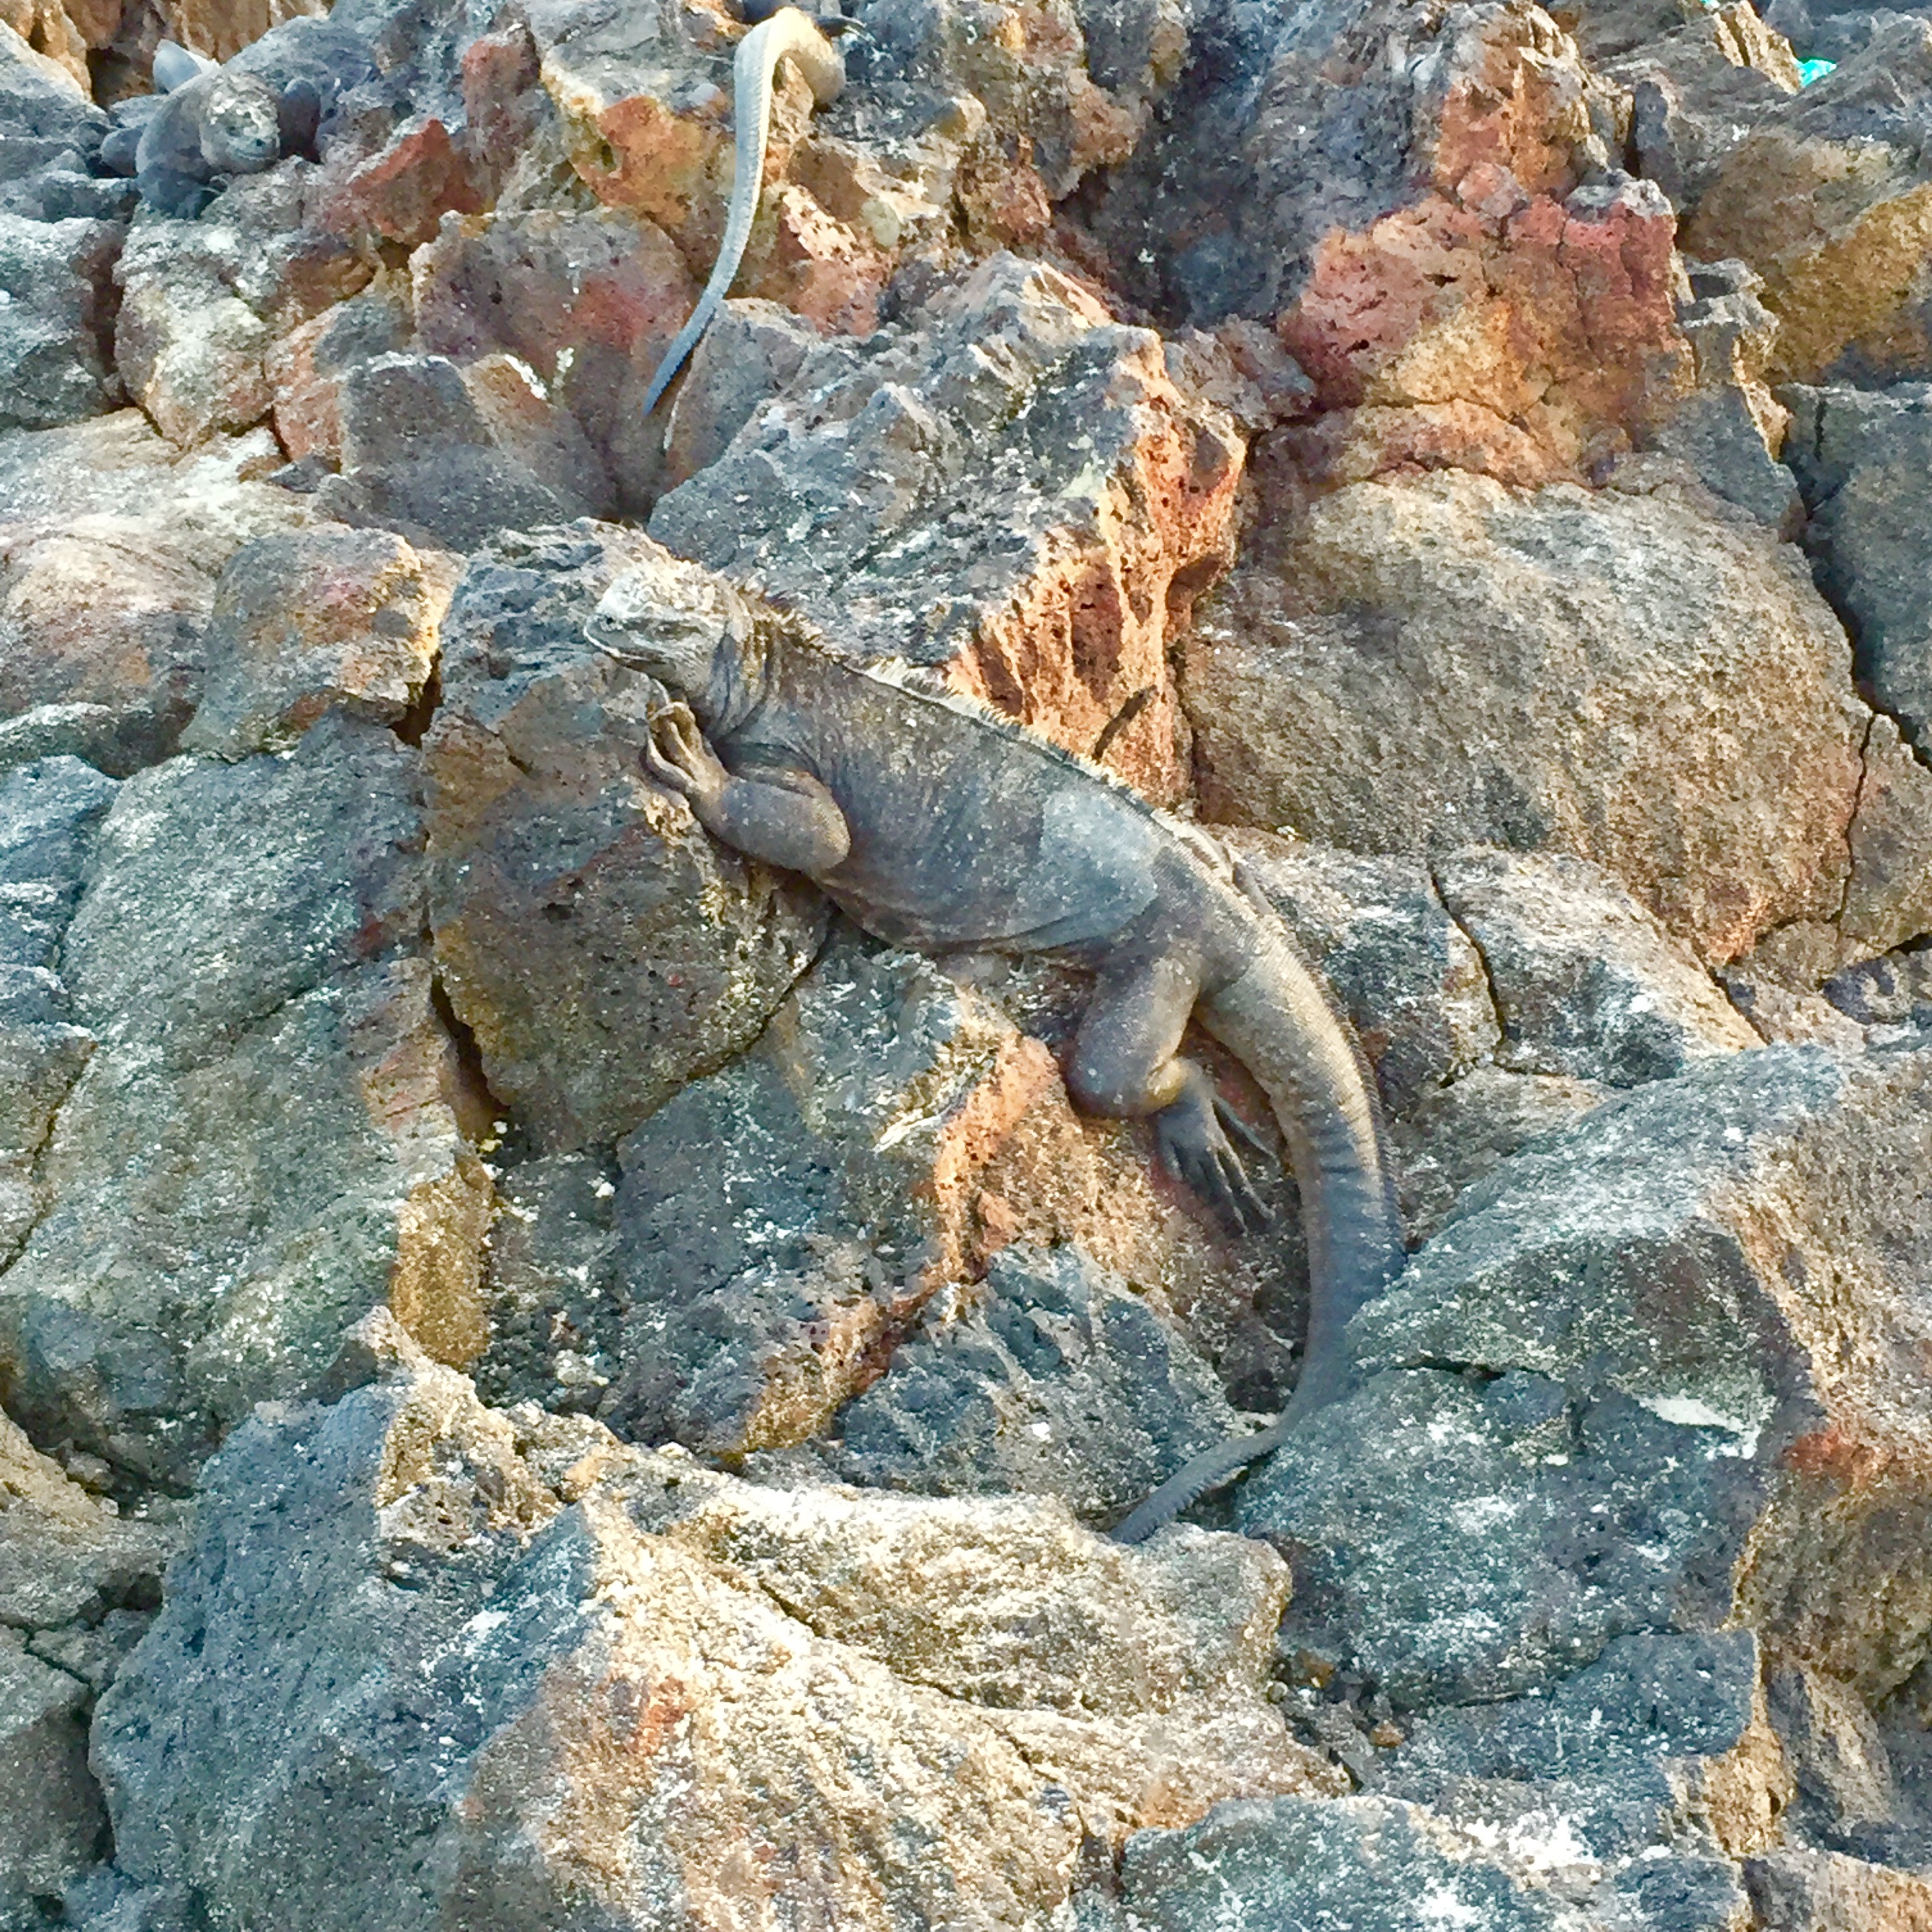 Hundreds of marine iguanas can be seen nesting on the beaches in Isla Isabela in the Galapagos Islands